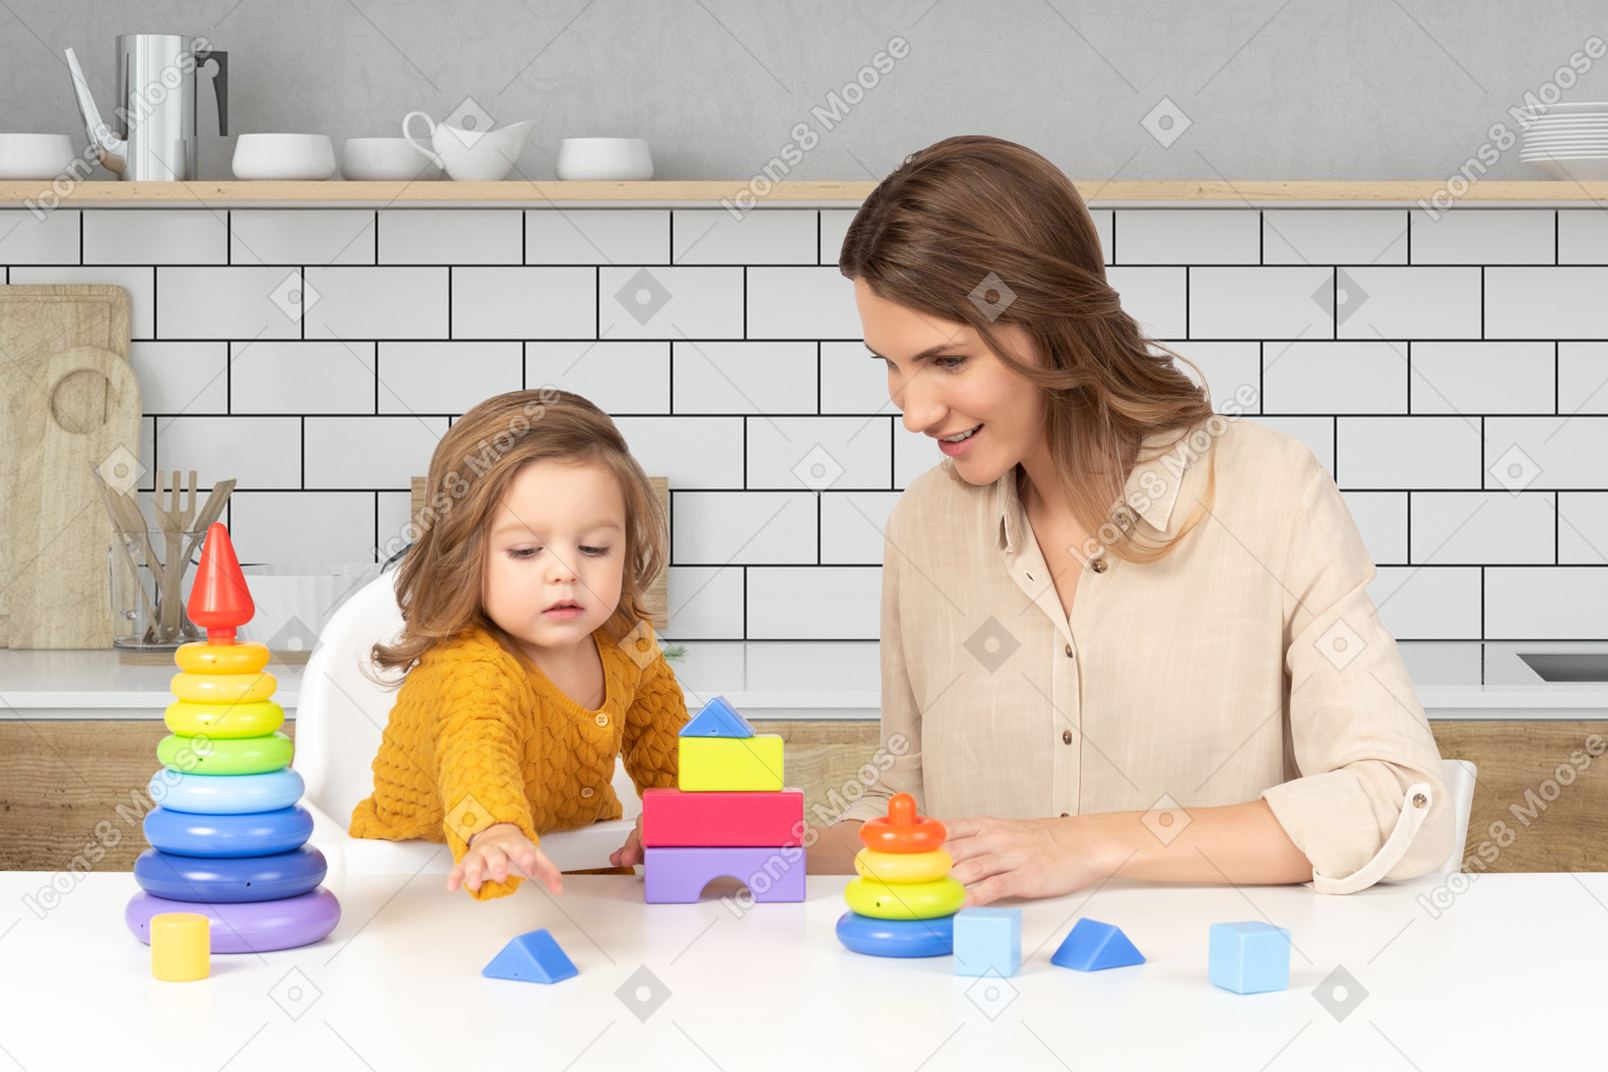 A mother and her baby are playing with toys